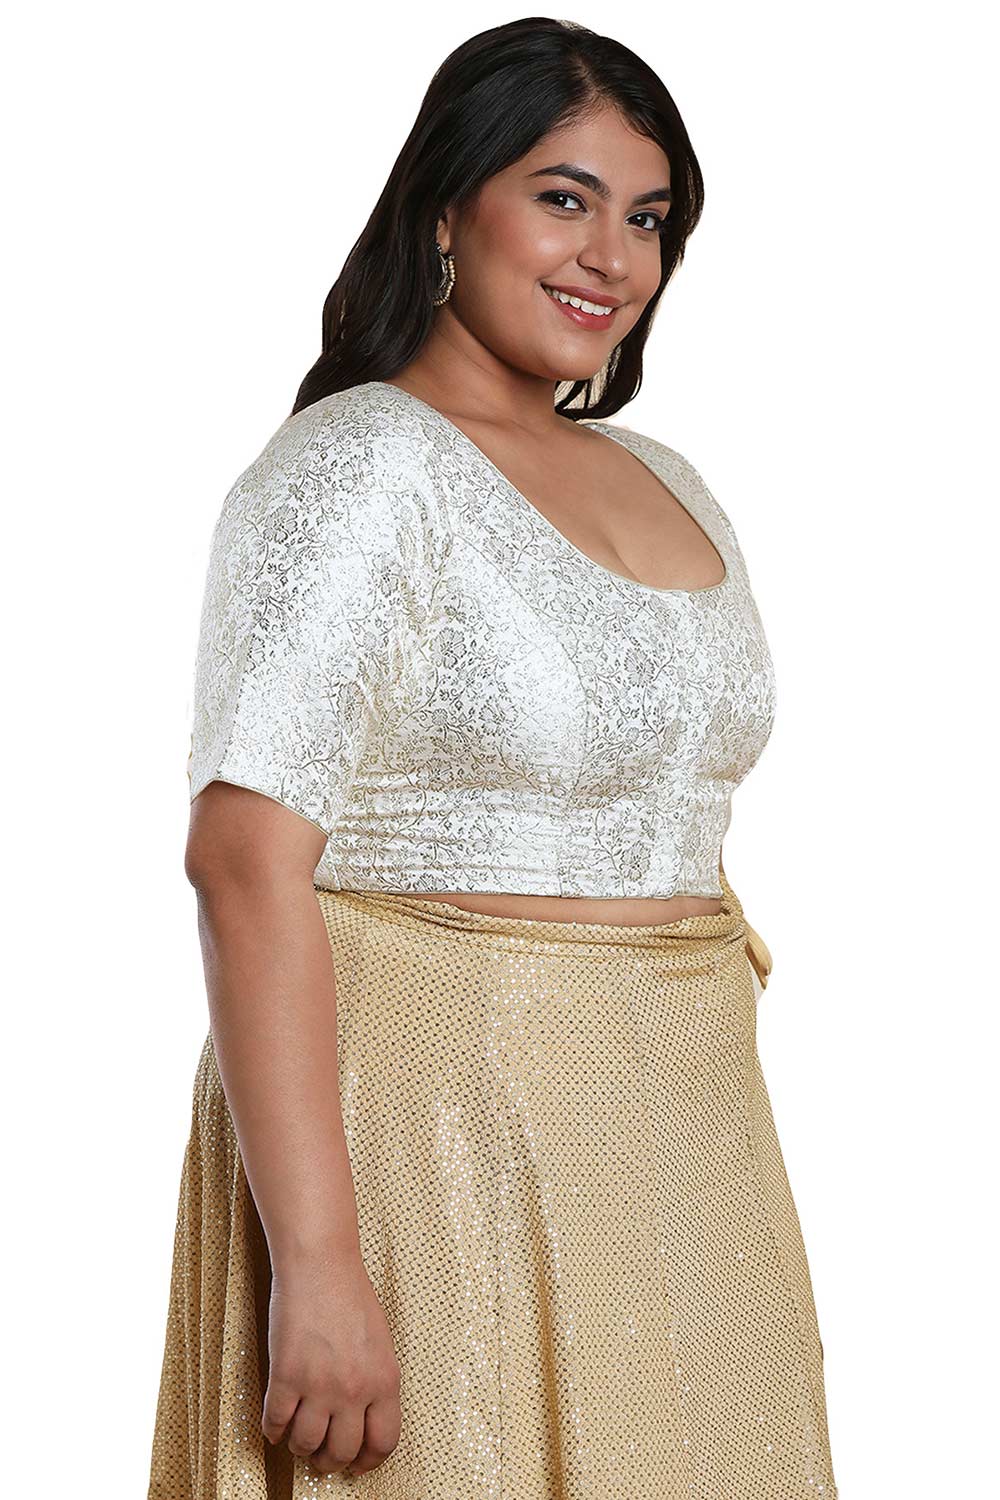 Buy Off White Brocade Readymade Saree Blouse Online - One Minute Sareee